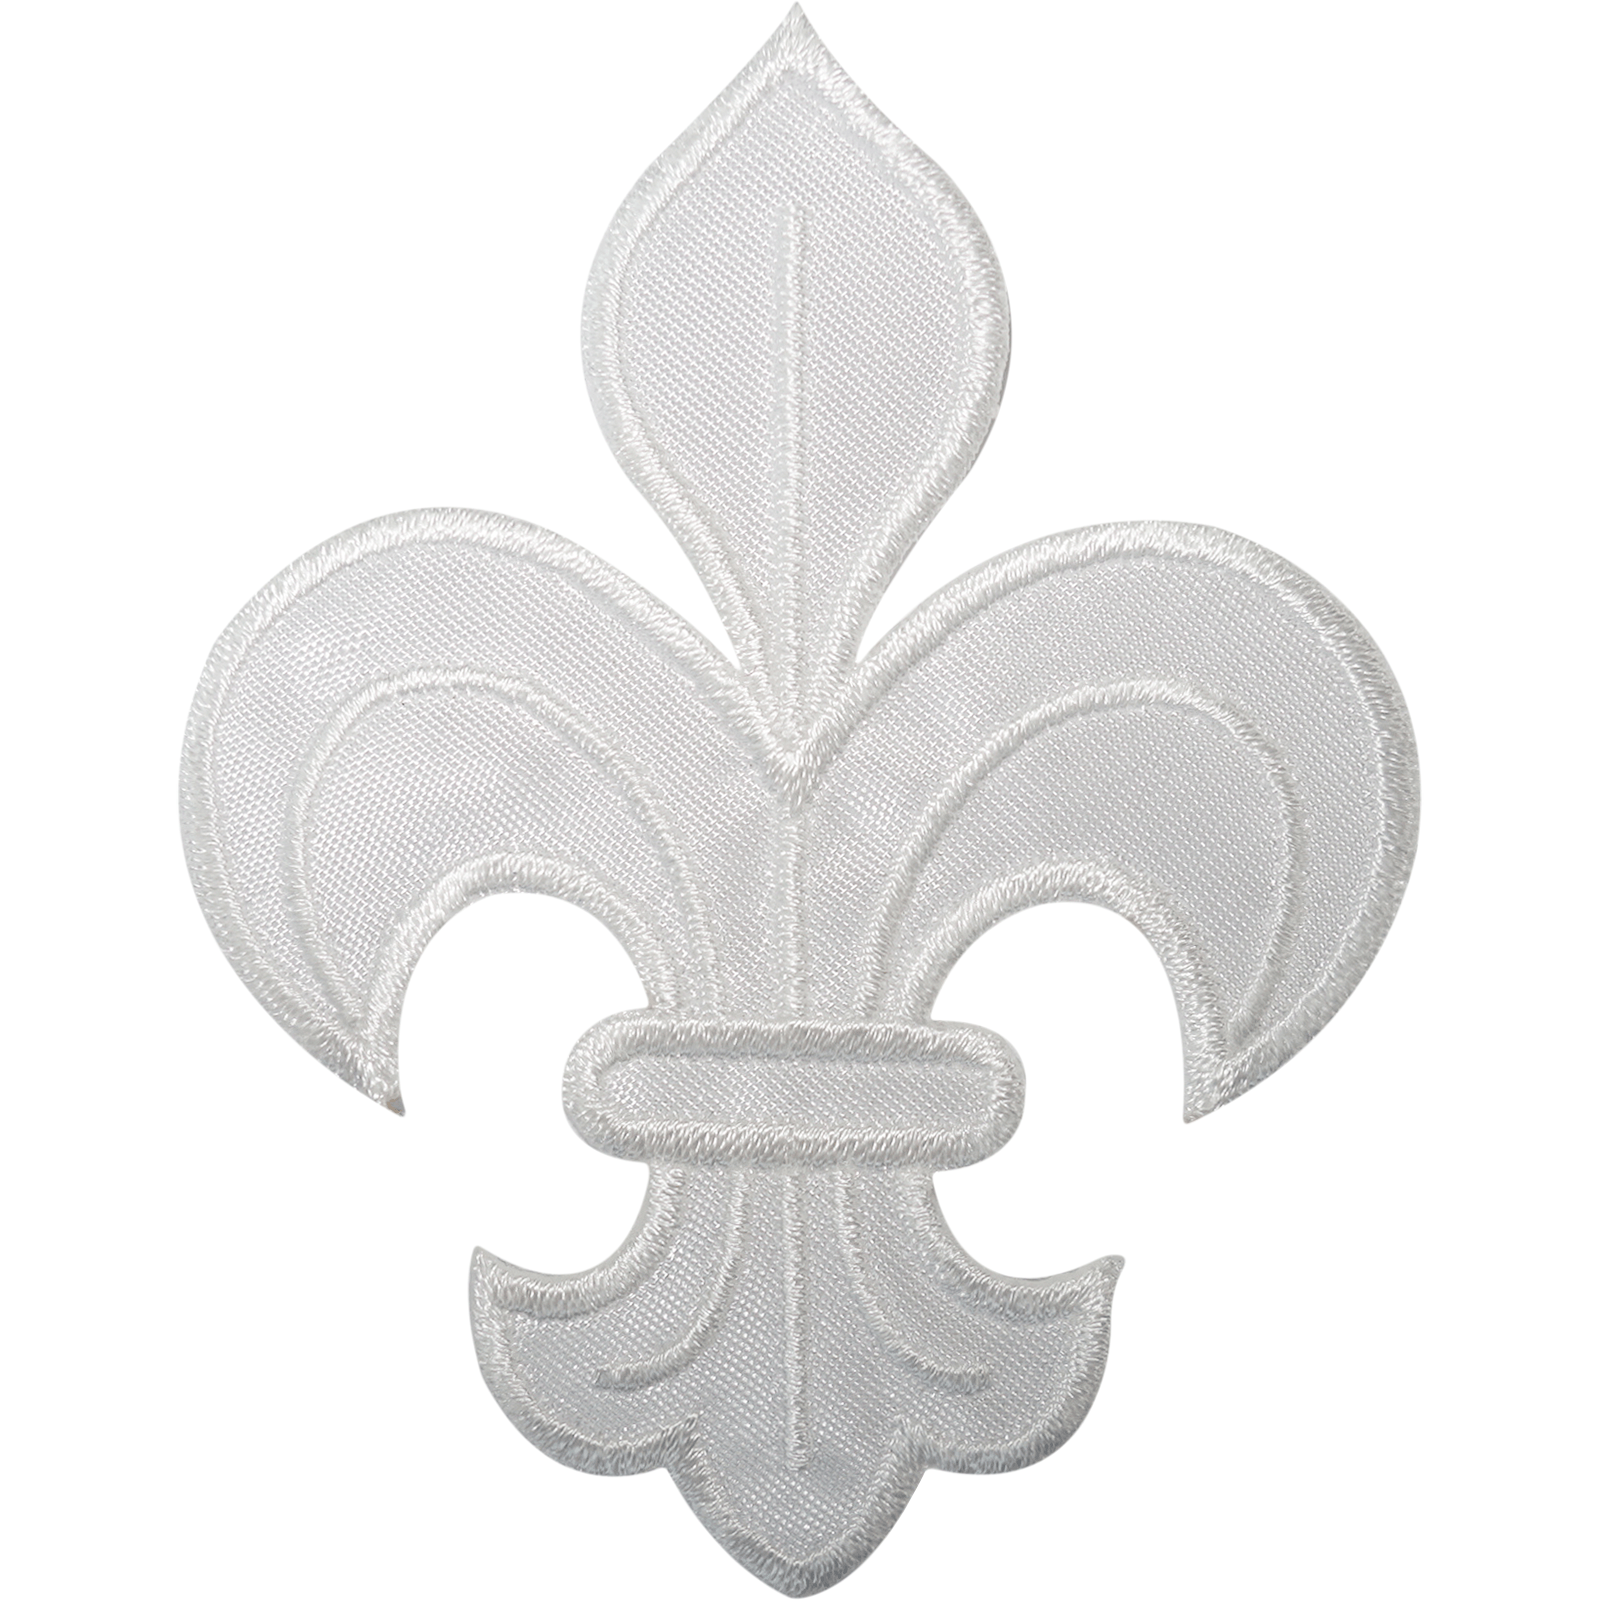 Fleur De Lis Iron On Patch Sew On Badge France Coat Of Arms French Flower Lily